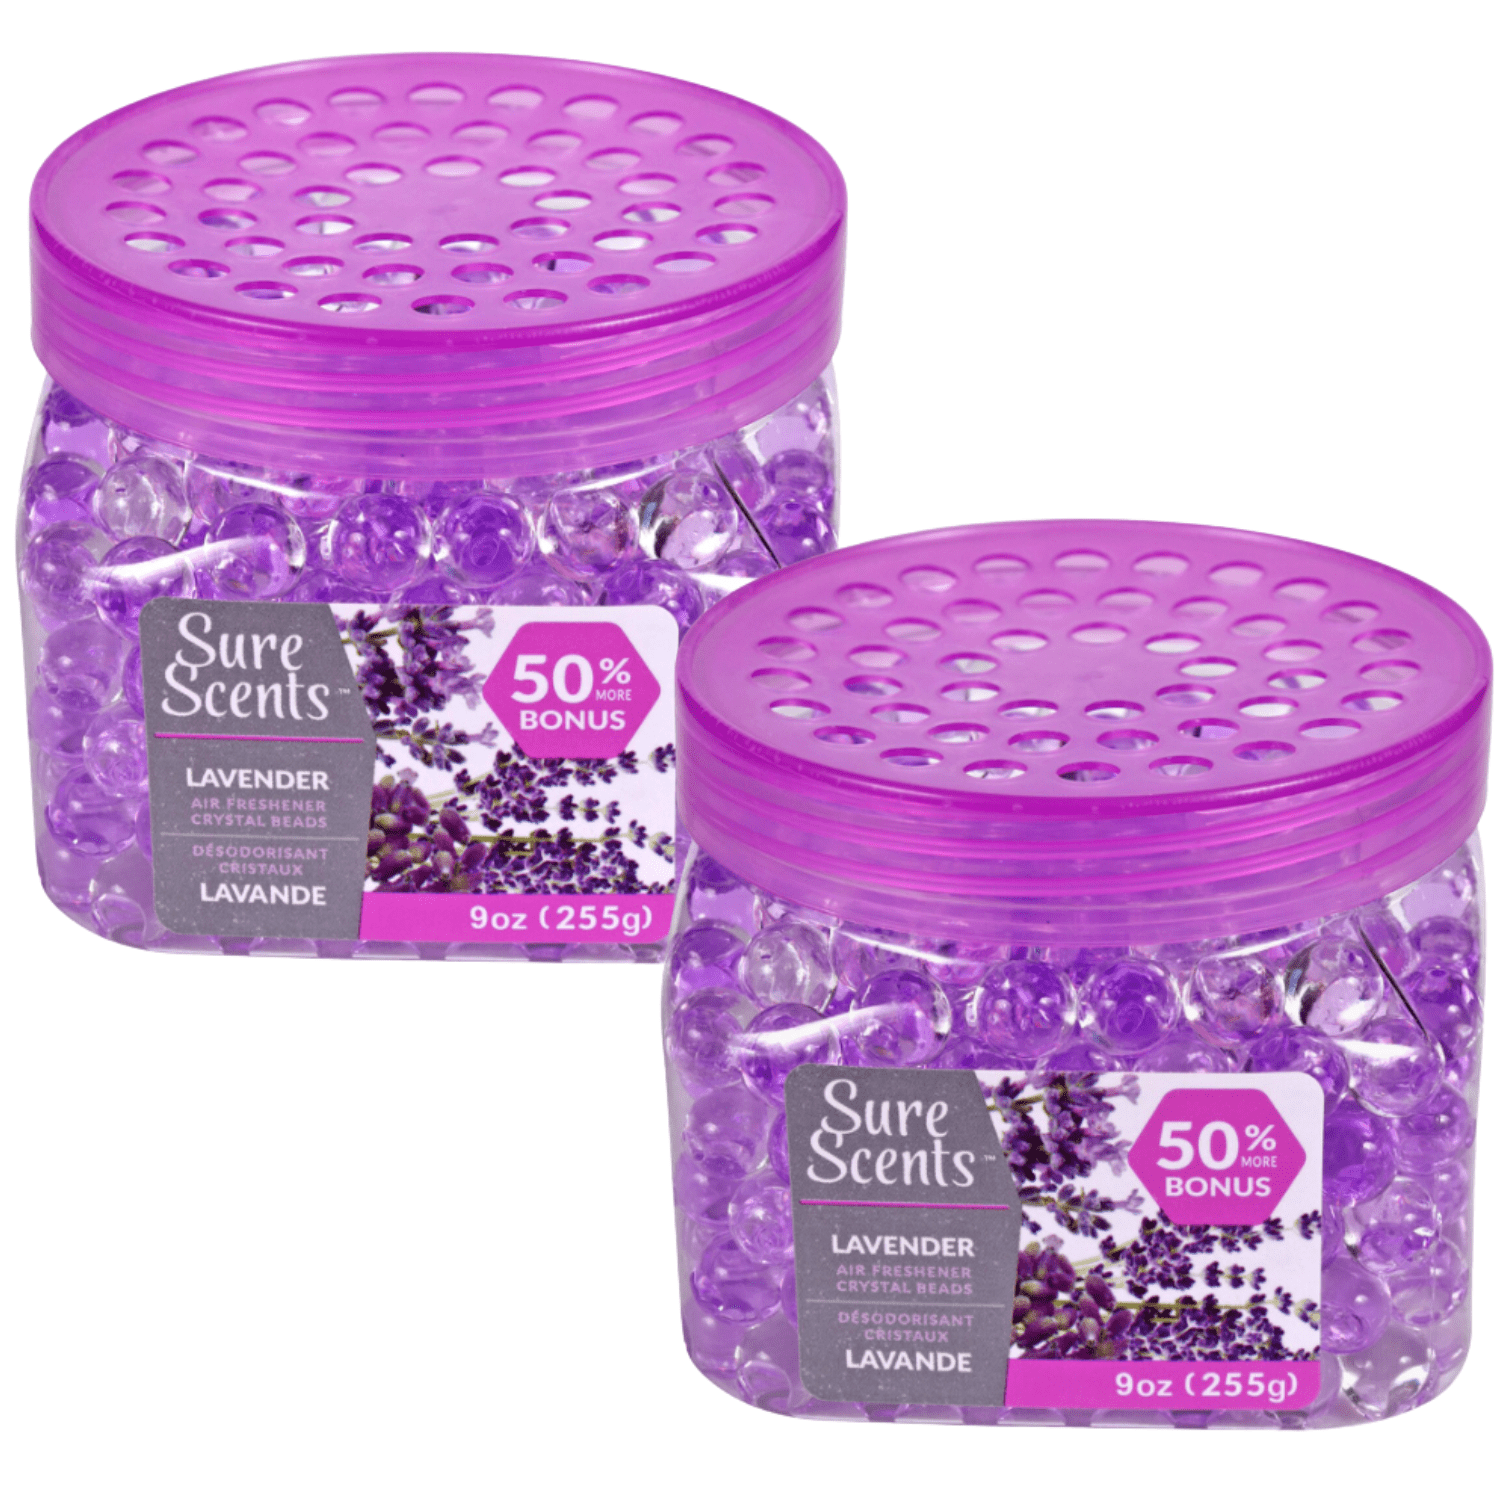 Sure Scents Crystal Beads Air Fresheners Lavender Scent Eliminate Odors  Long Lasting Home Fragrance, 9 oz Jars - Set of 2